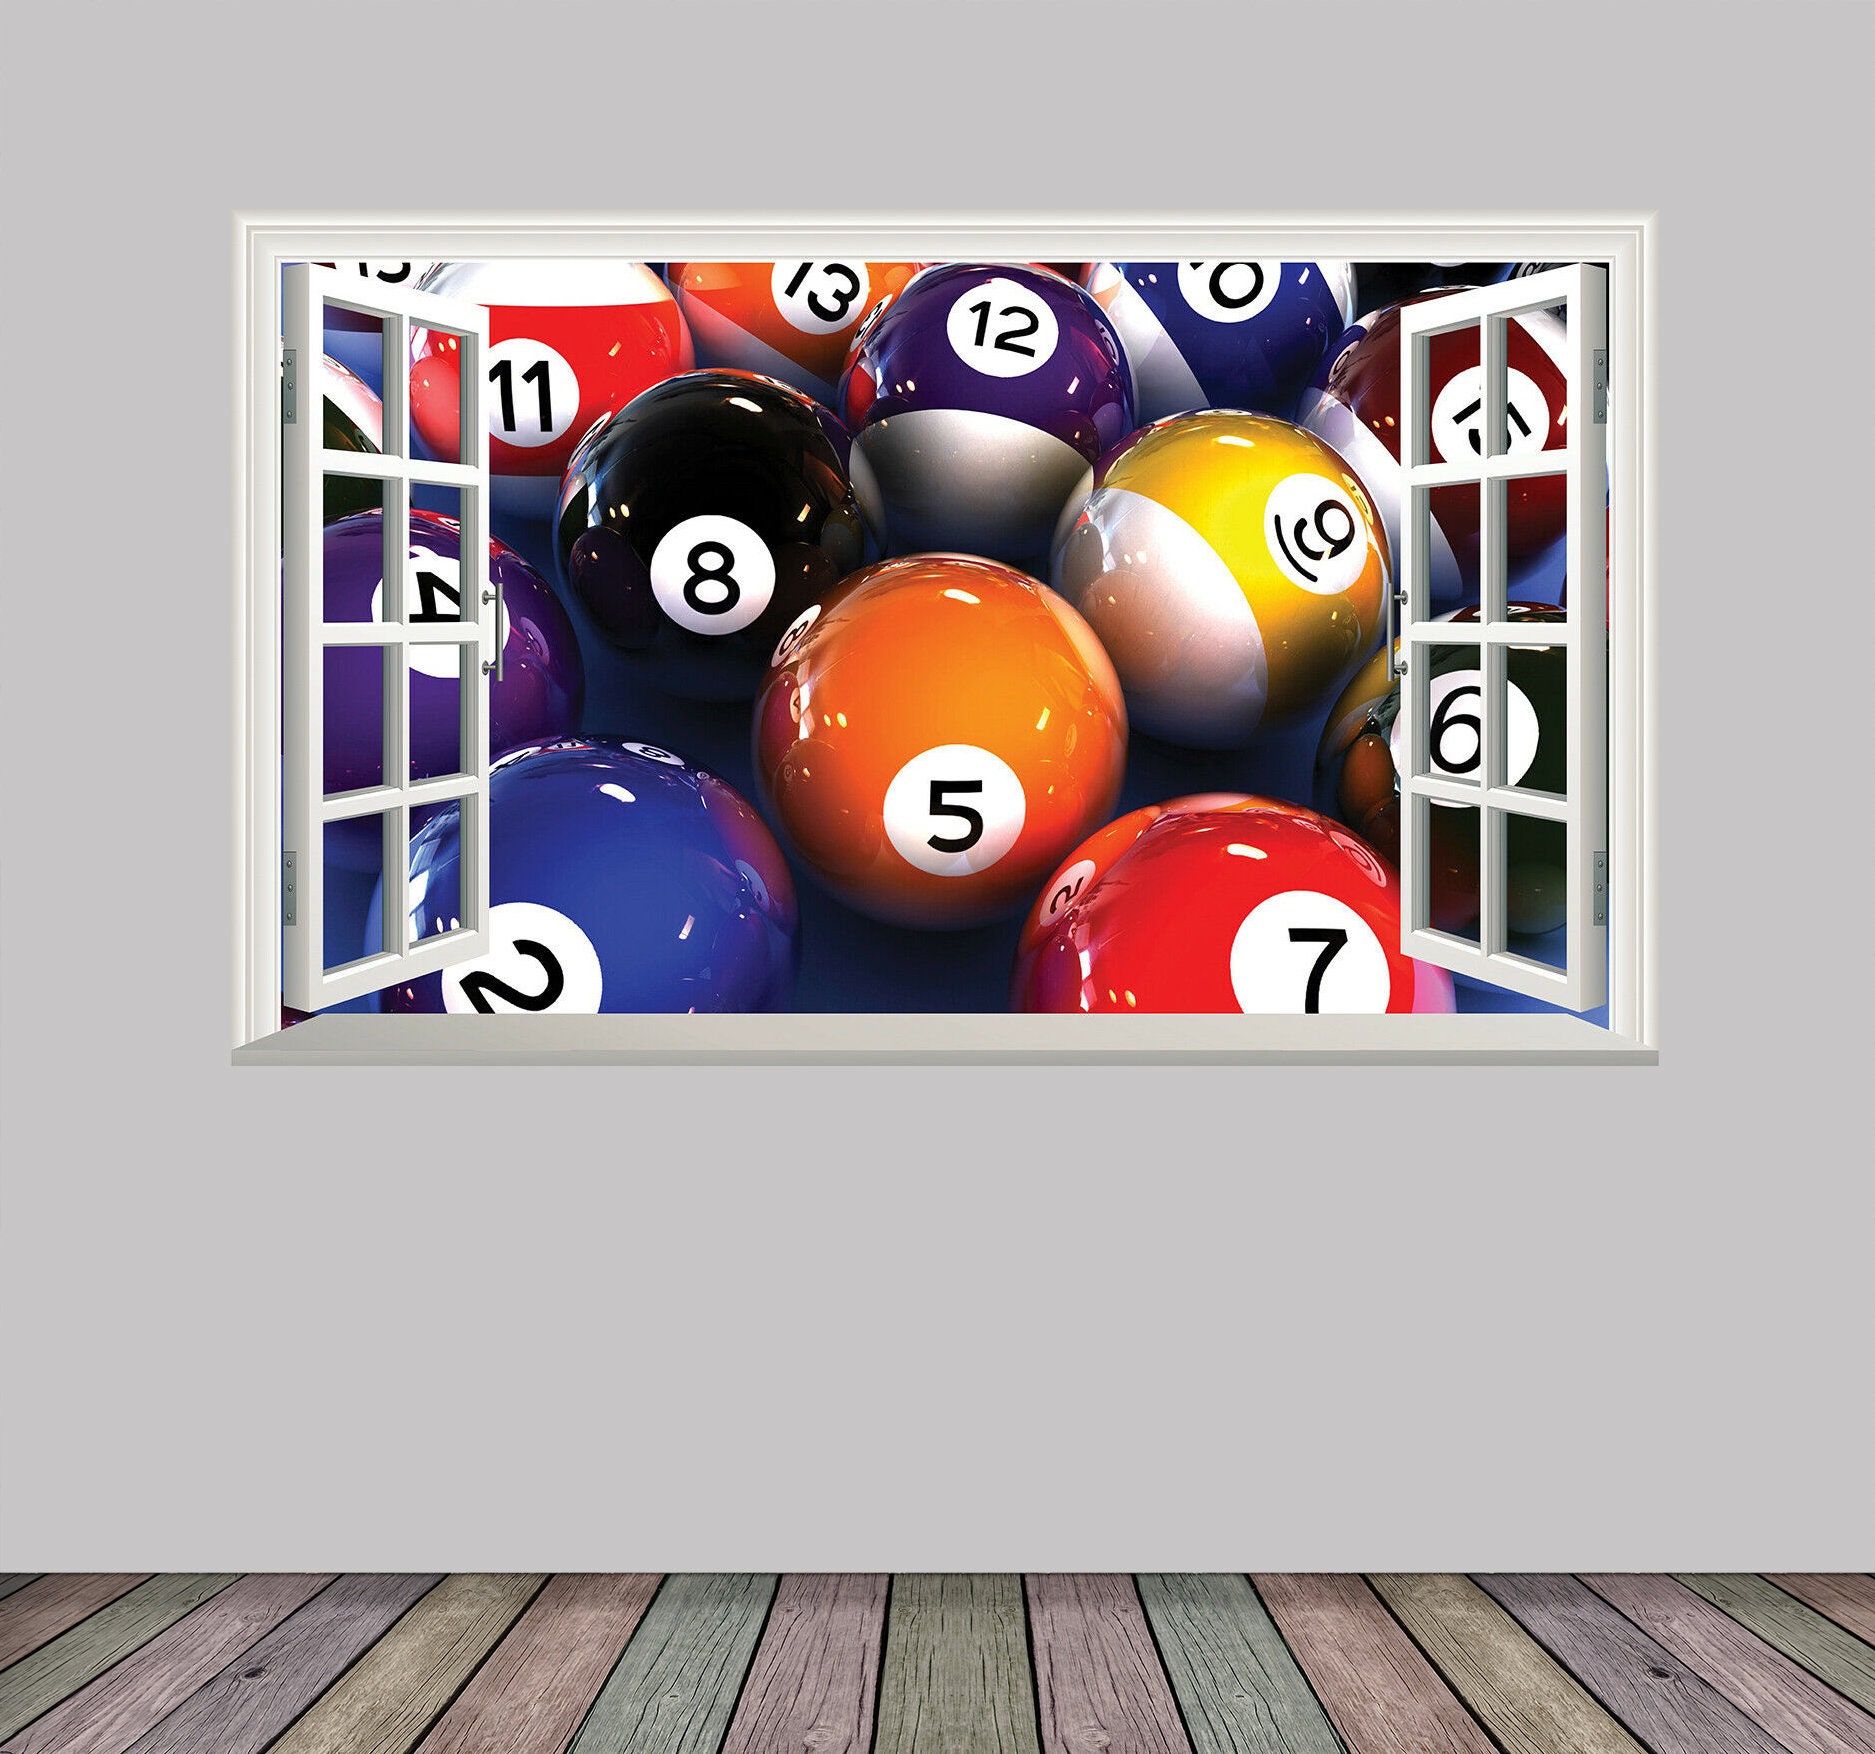 Realistic 8 Ball Pool Billiards Eight Ball Sticker for Sale by cinemapool